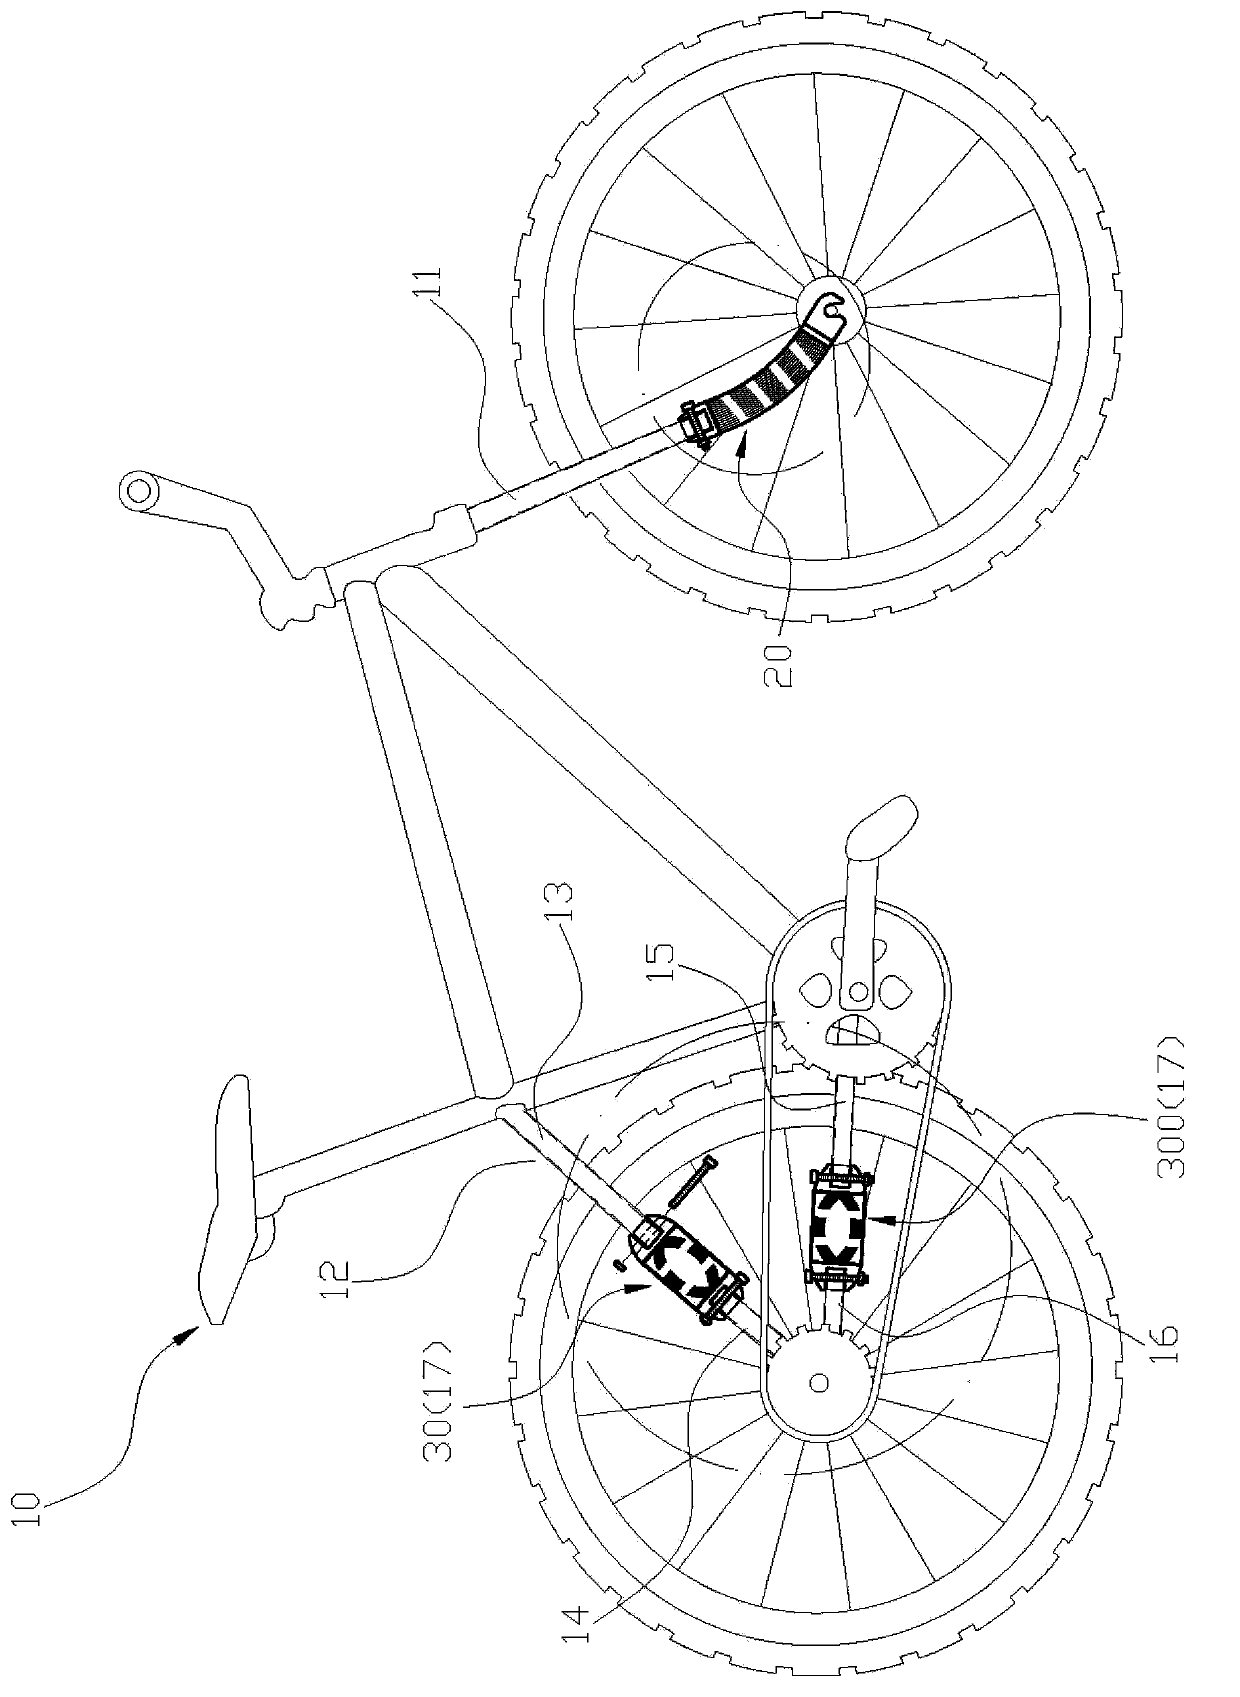 Buffering shock absorber of bicycle